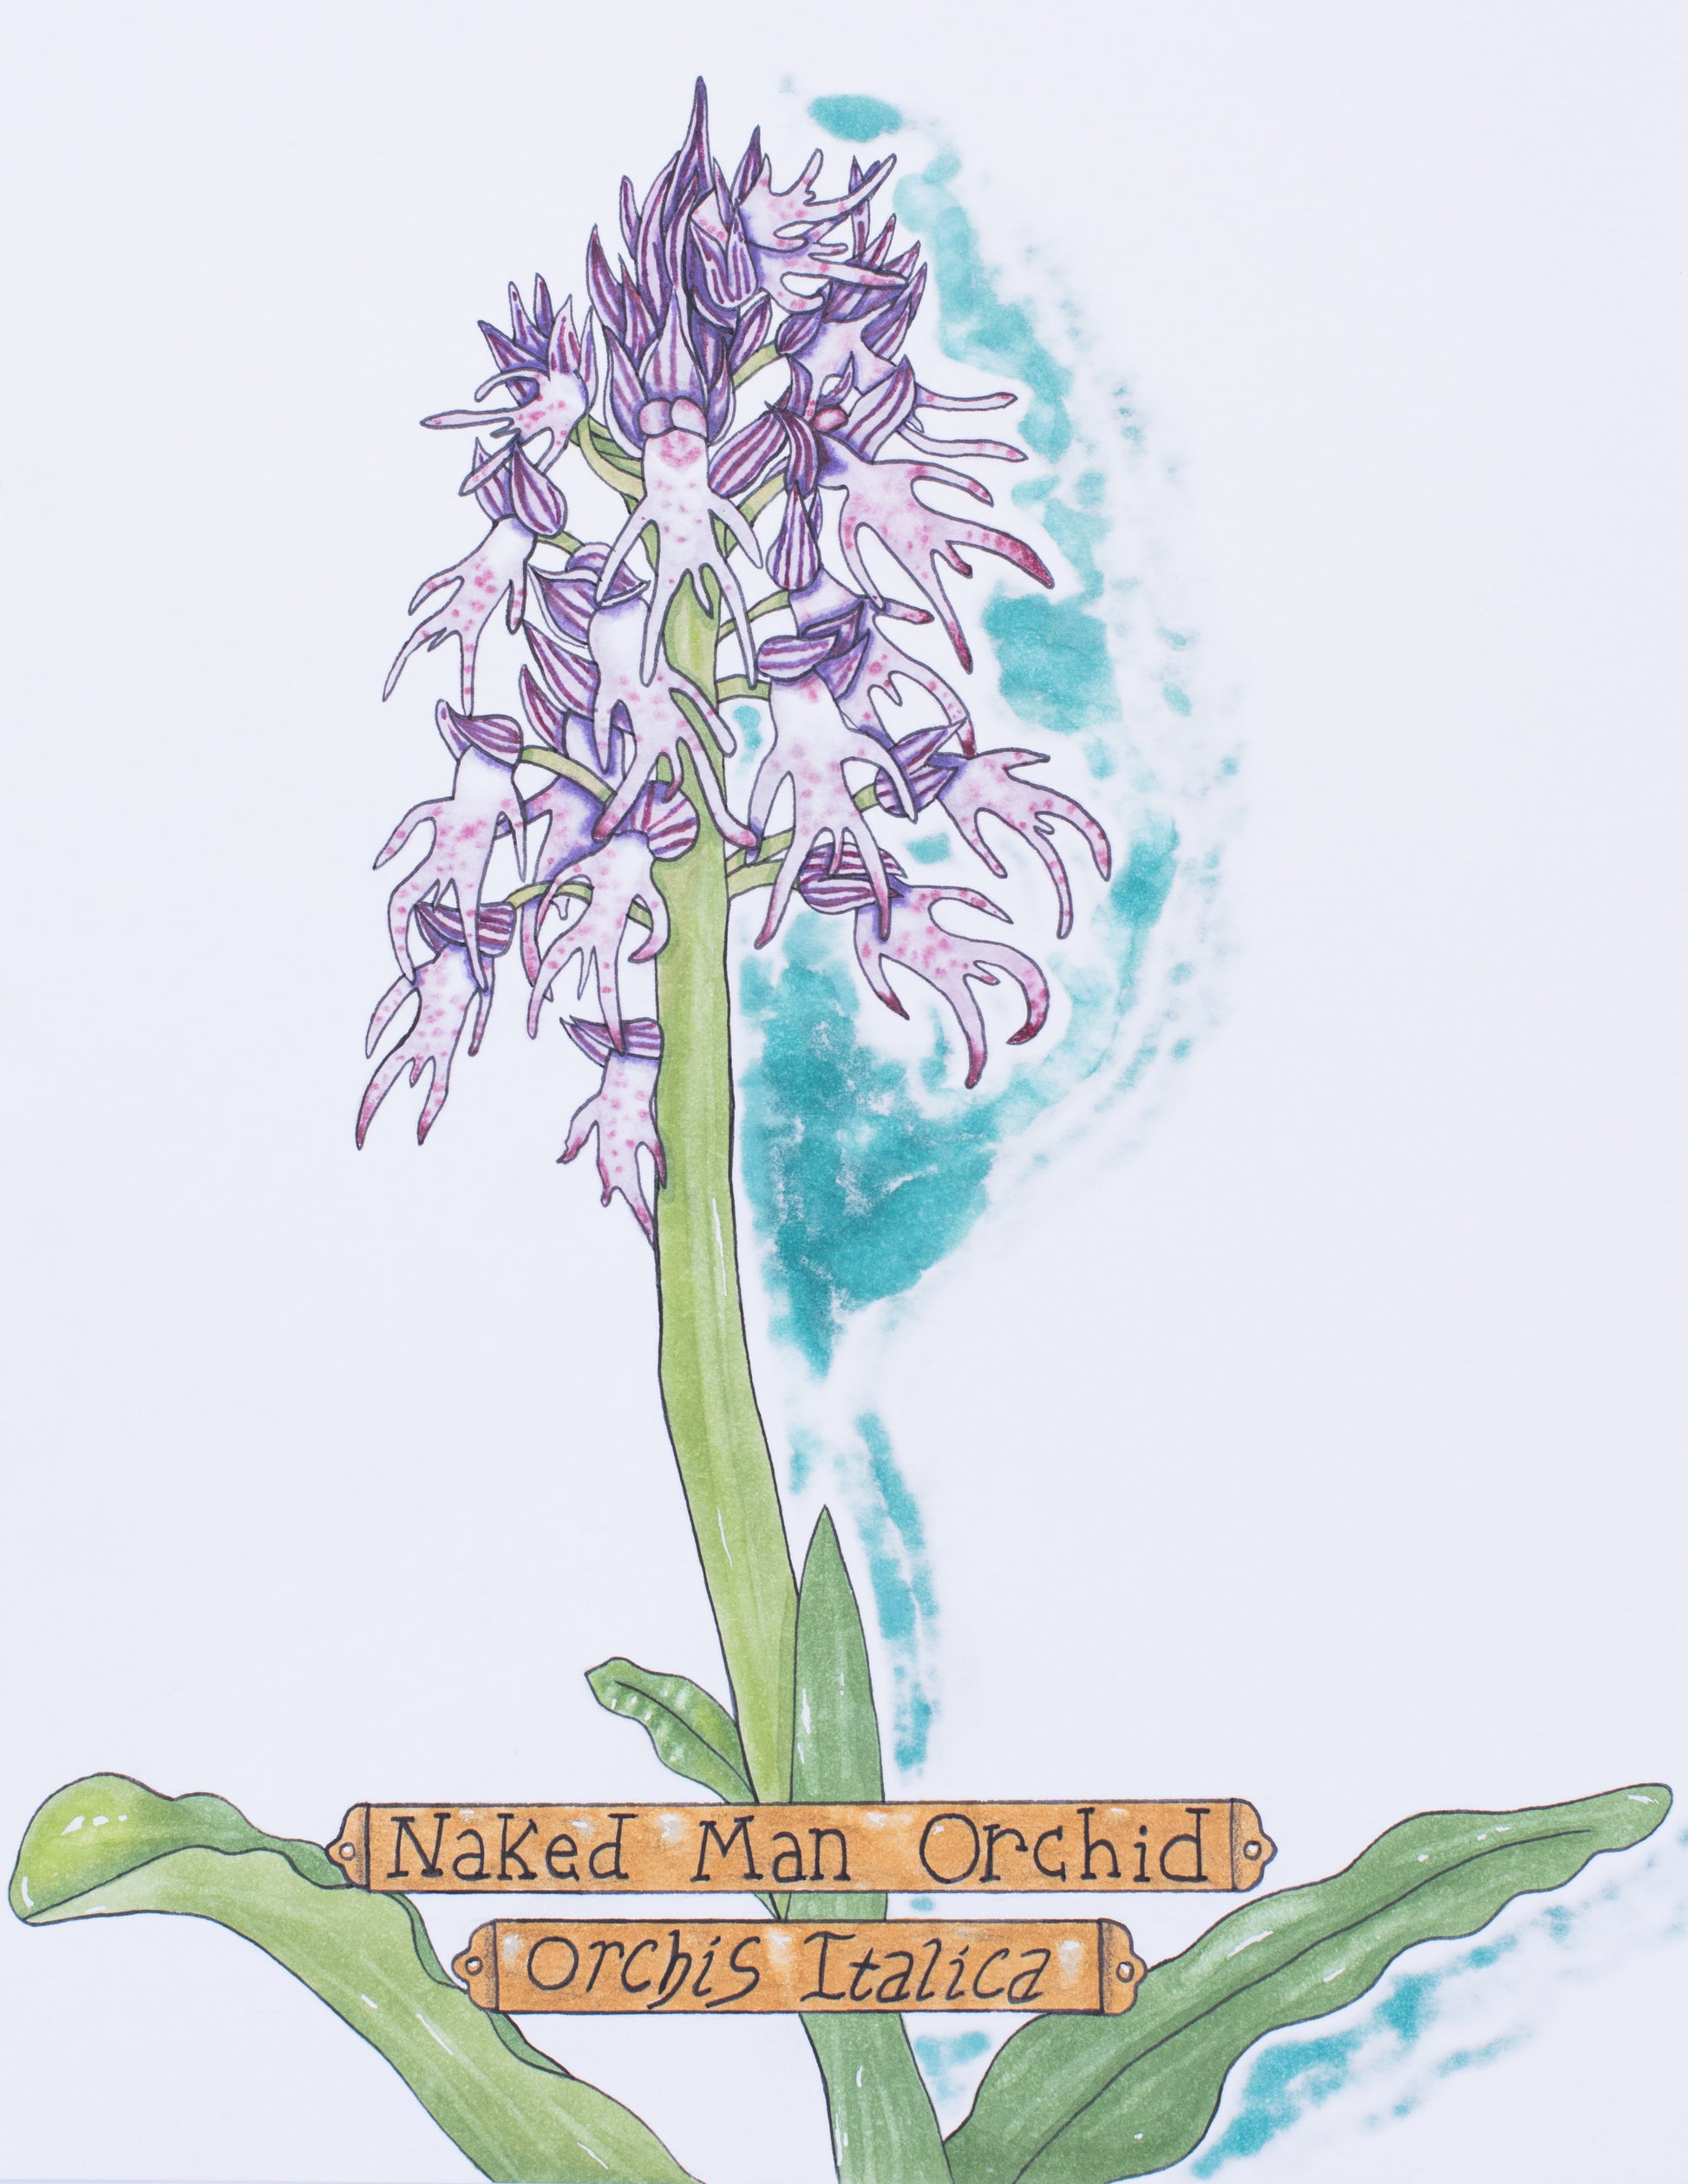 This is an art print of a illustration done in copic markers. The art shows a flower called a "Naked Man Orchid" also known as "Orchis Italica". The flower is a single stalk with multiple blooms on it - the blooms are light and dark purple and are shaped like little naked men. There is even a you-know-what in between their petal legs. The scientific and common names of this hilarious plant are written on golden illustrated plaques at the bottom of the art piece.